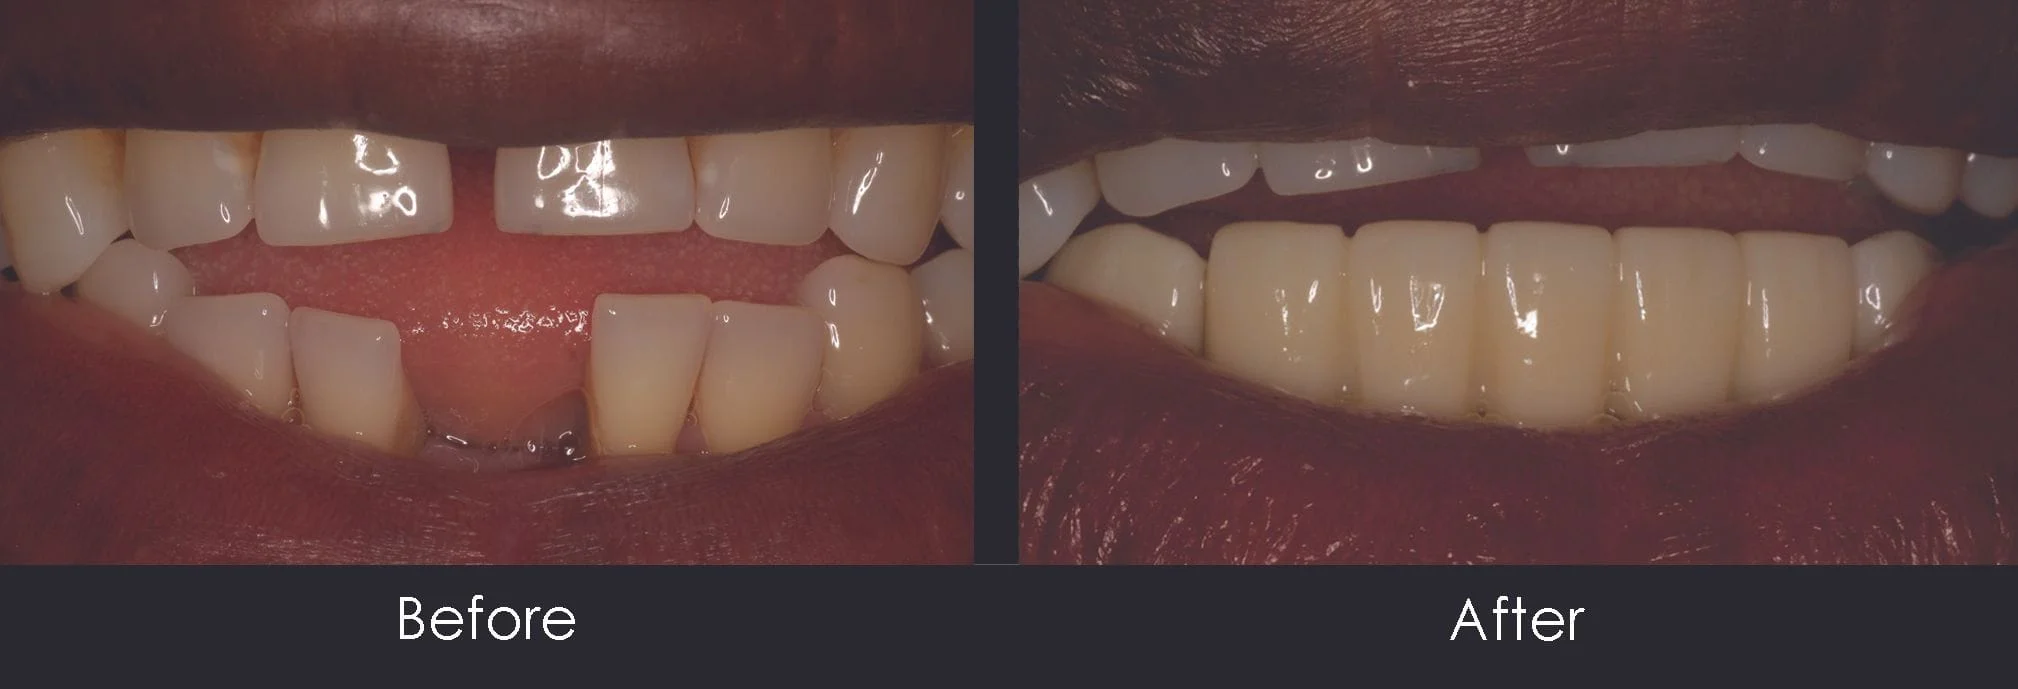 Before and After dental Bridge